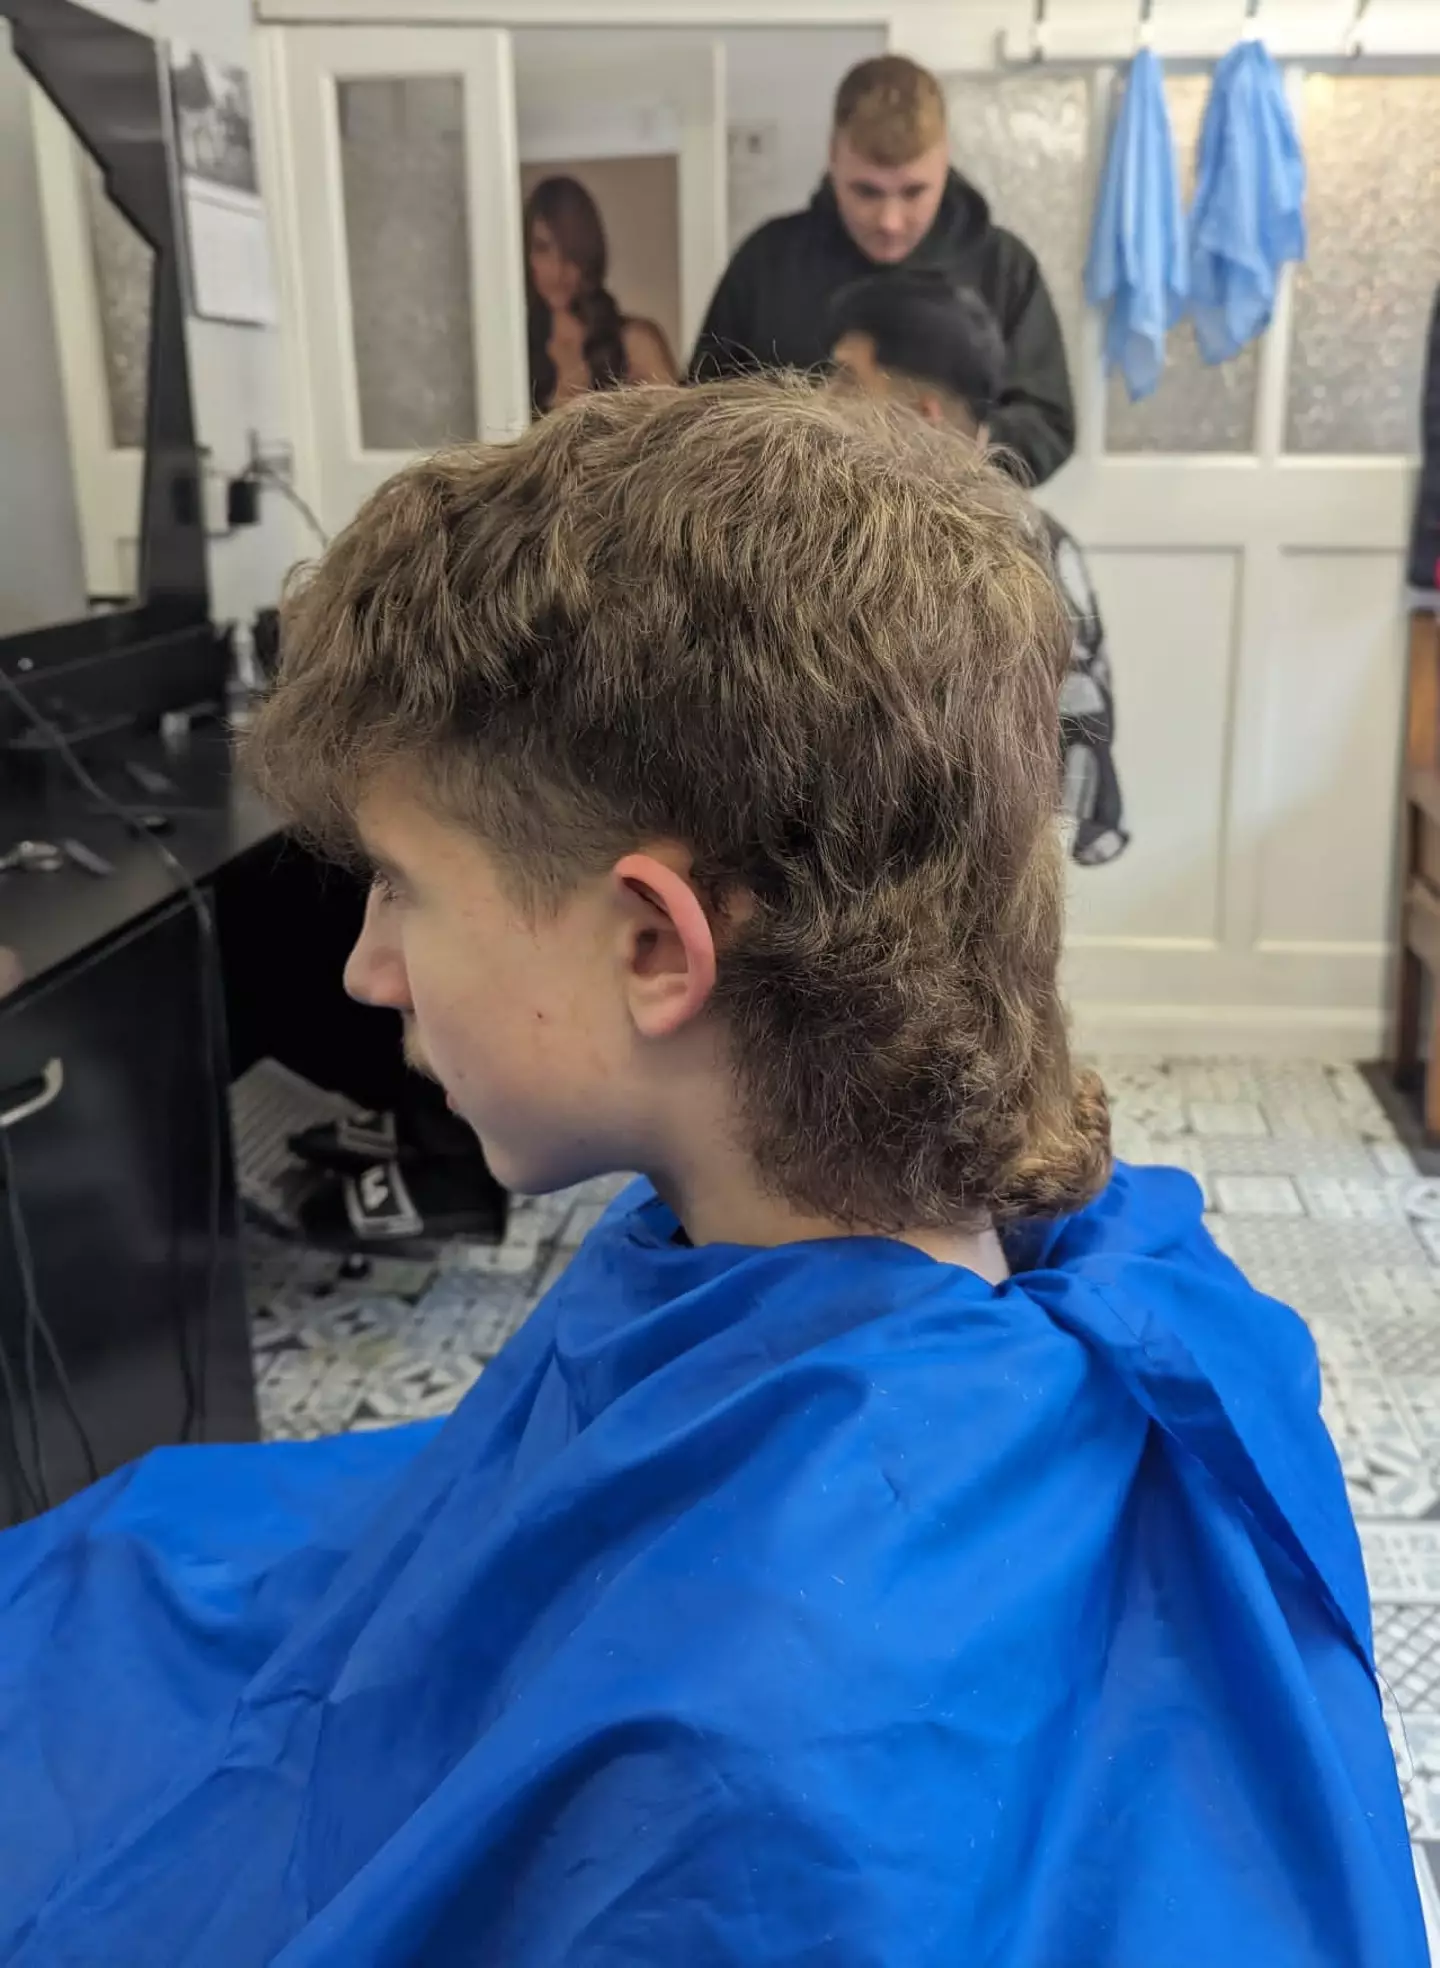 Toby has since cut his hair while raising funds for charity.